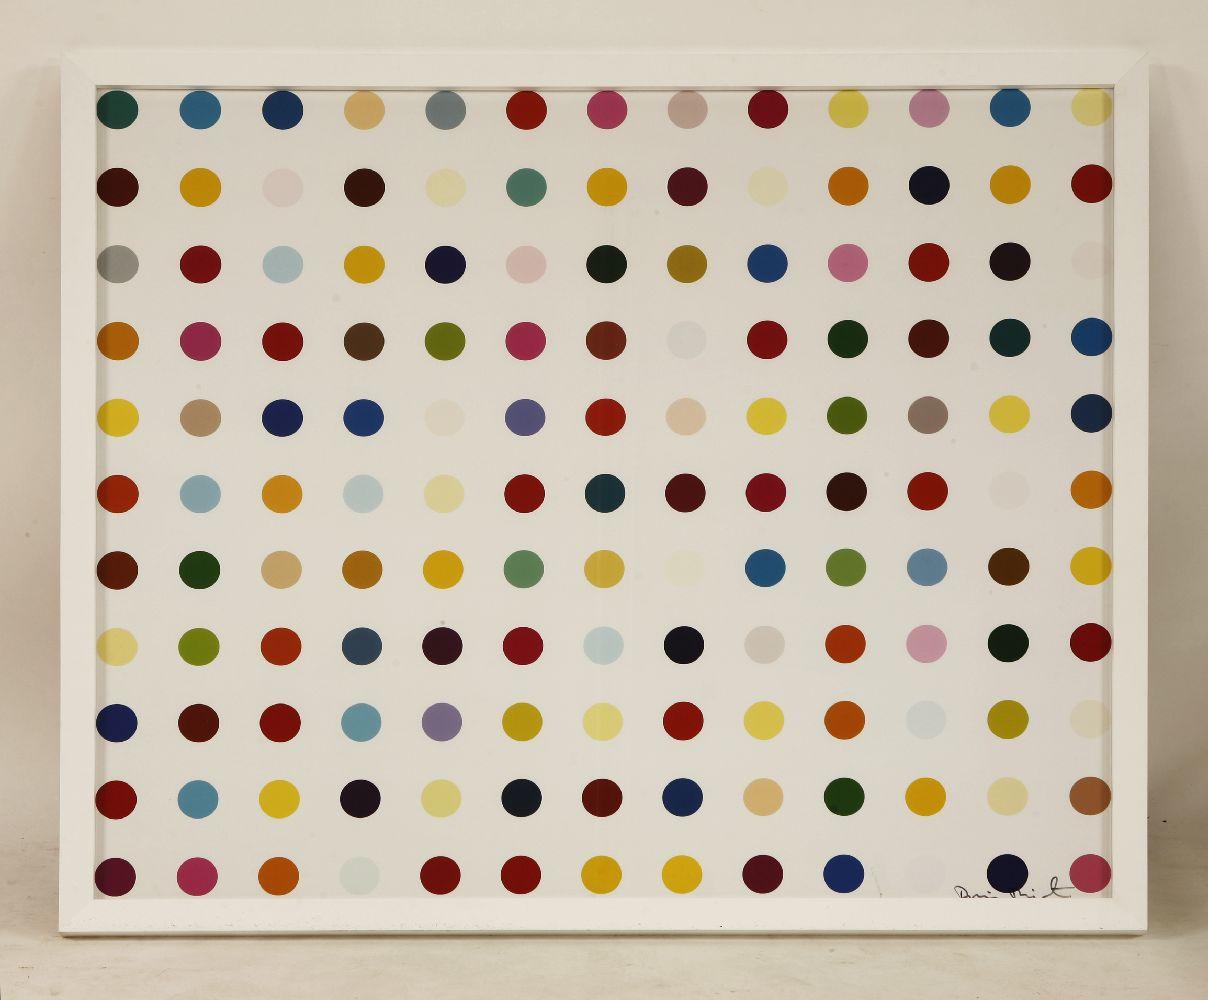 Damien Hirst (British, b.1965) Lysergic Acid Diethylamide (LSD) Lambda inkjet print in colors, 2000, signed in black felt-tip pen, numbered on the reverse, published by Eyestorm, London, on glossy Fuji Professional paper, the full sheet